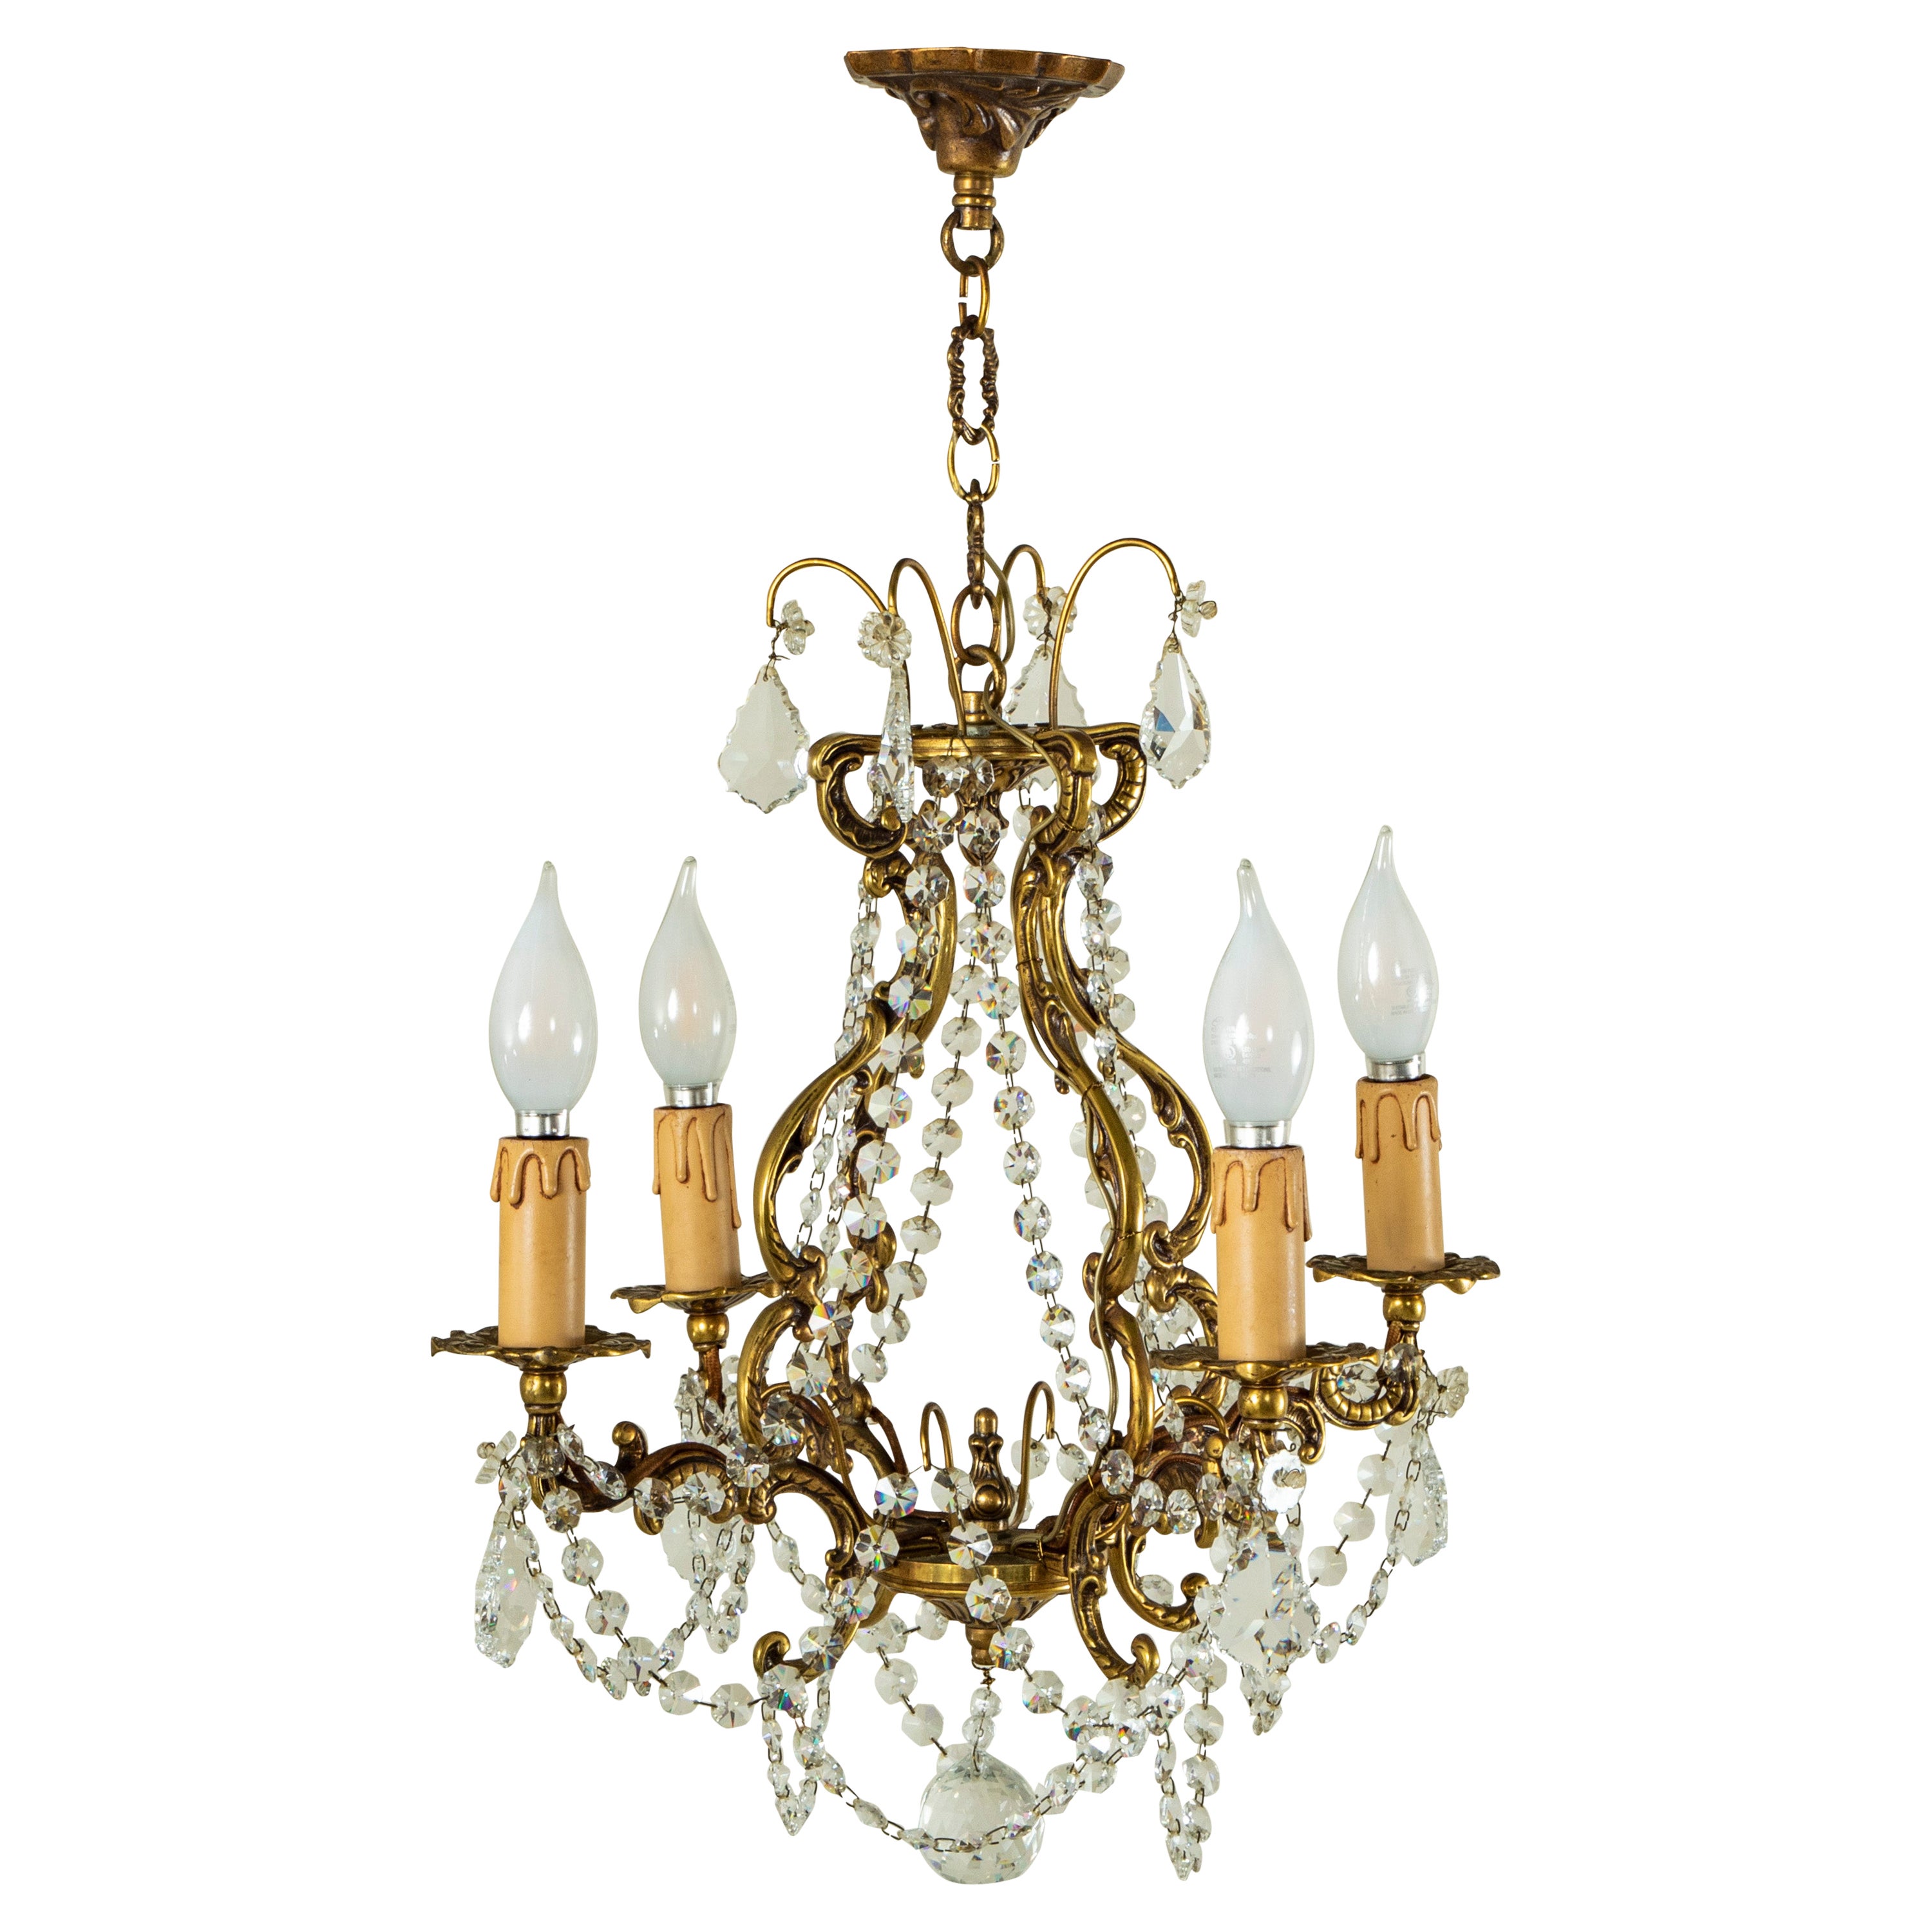 Early 20th Century Small Scale French Bronze and Strass Crystal Chandelier For Sale